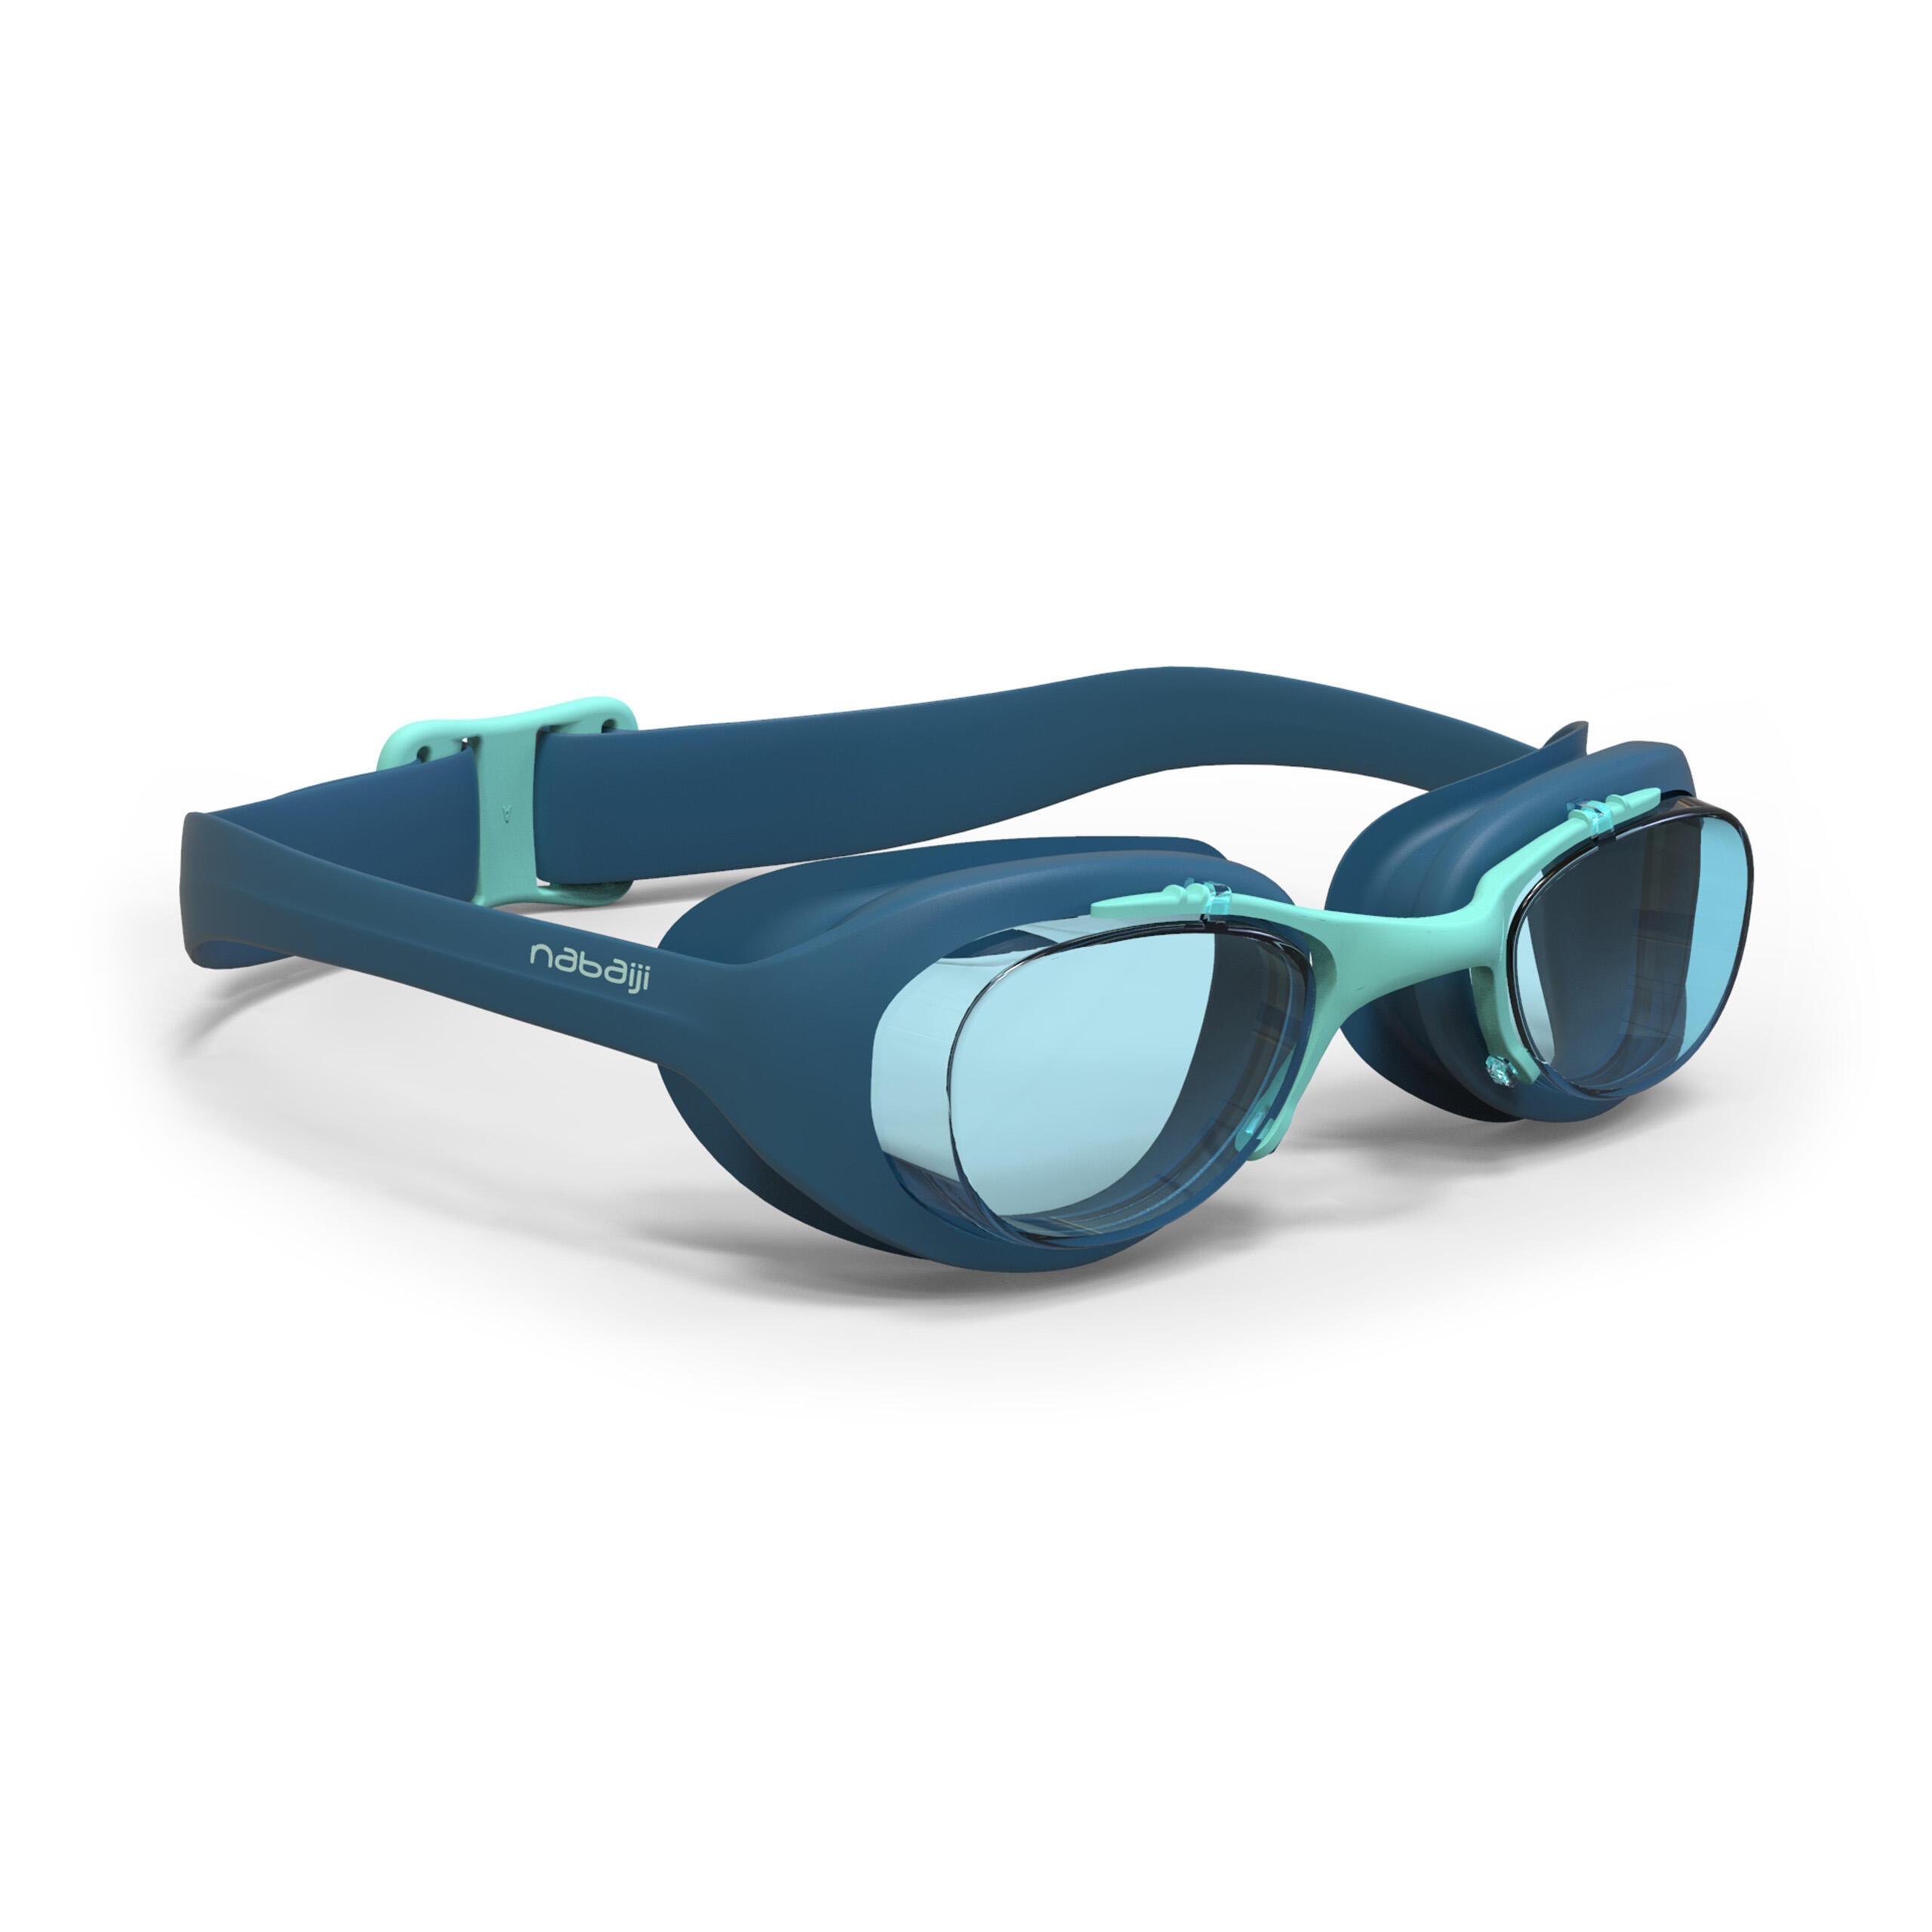 SWIMMING GOGGLES XBASE L CLEAR LENSES 